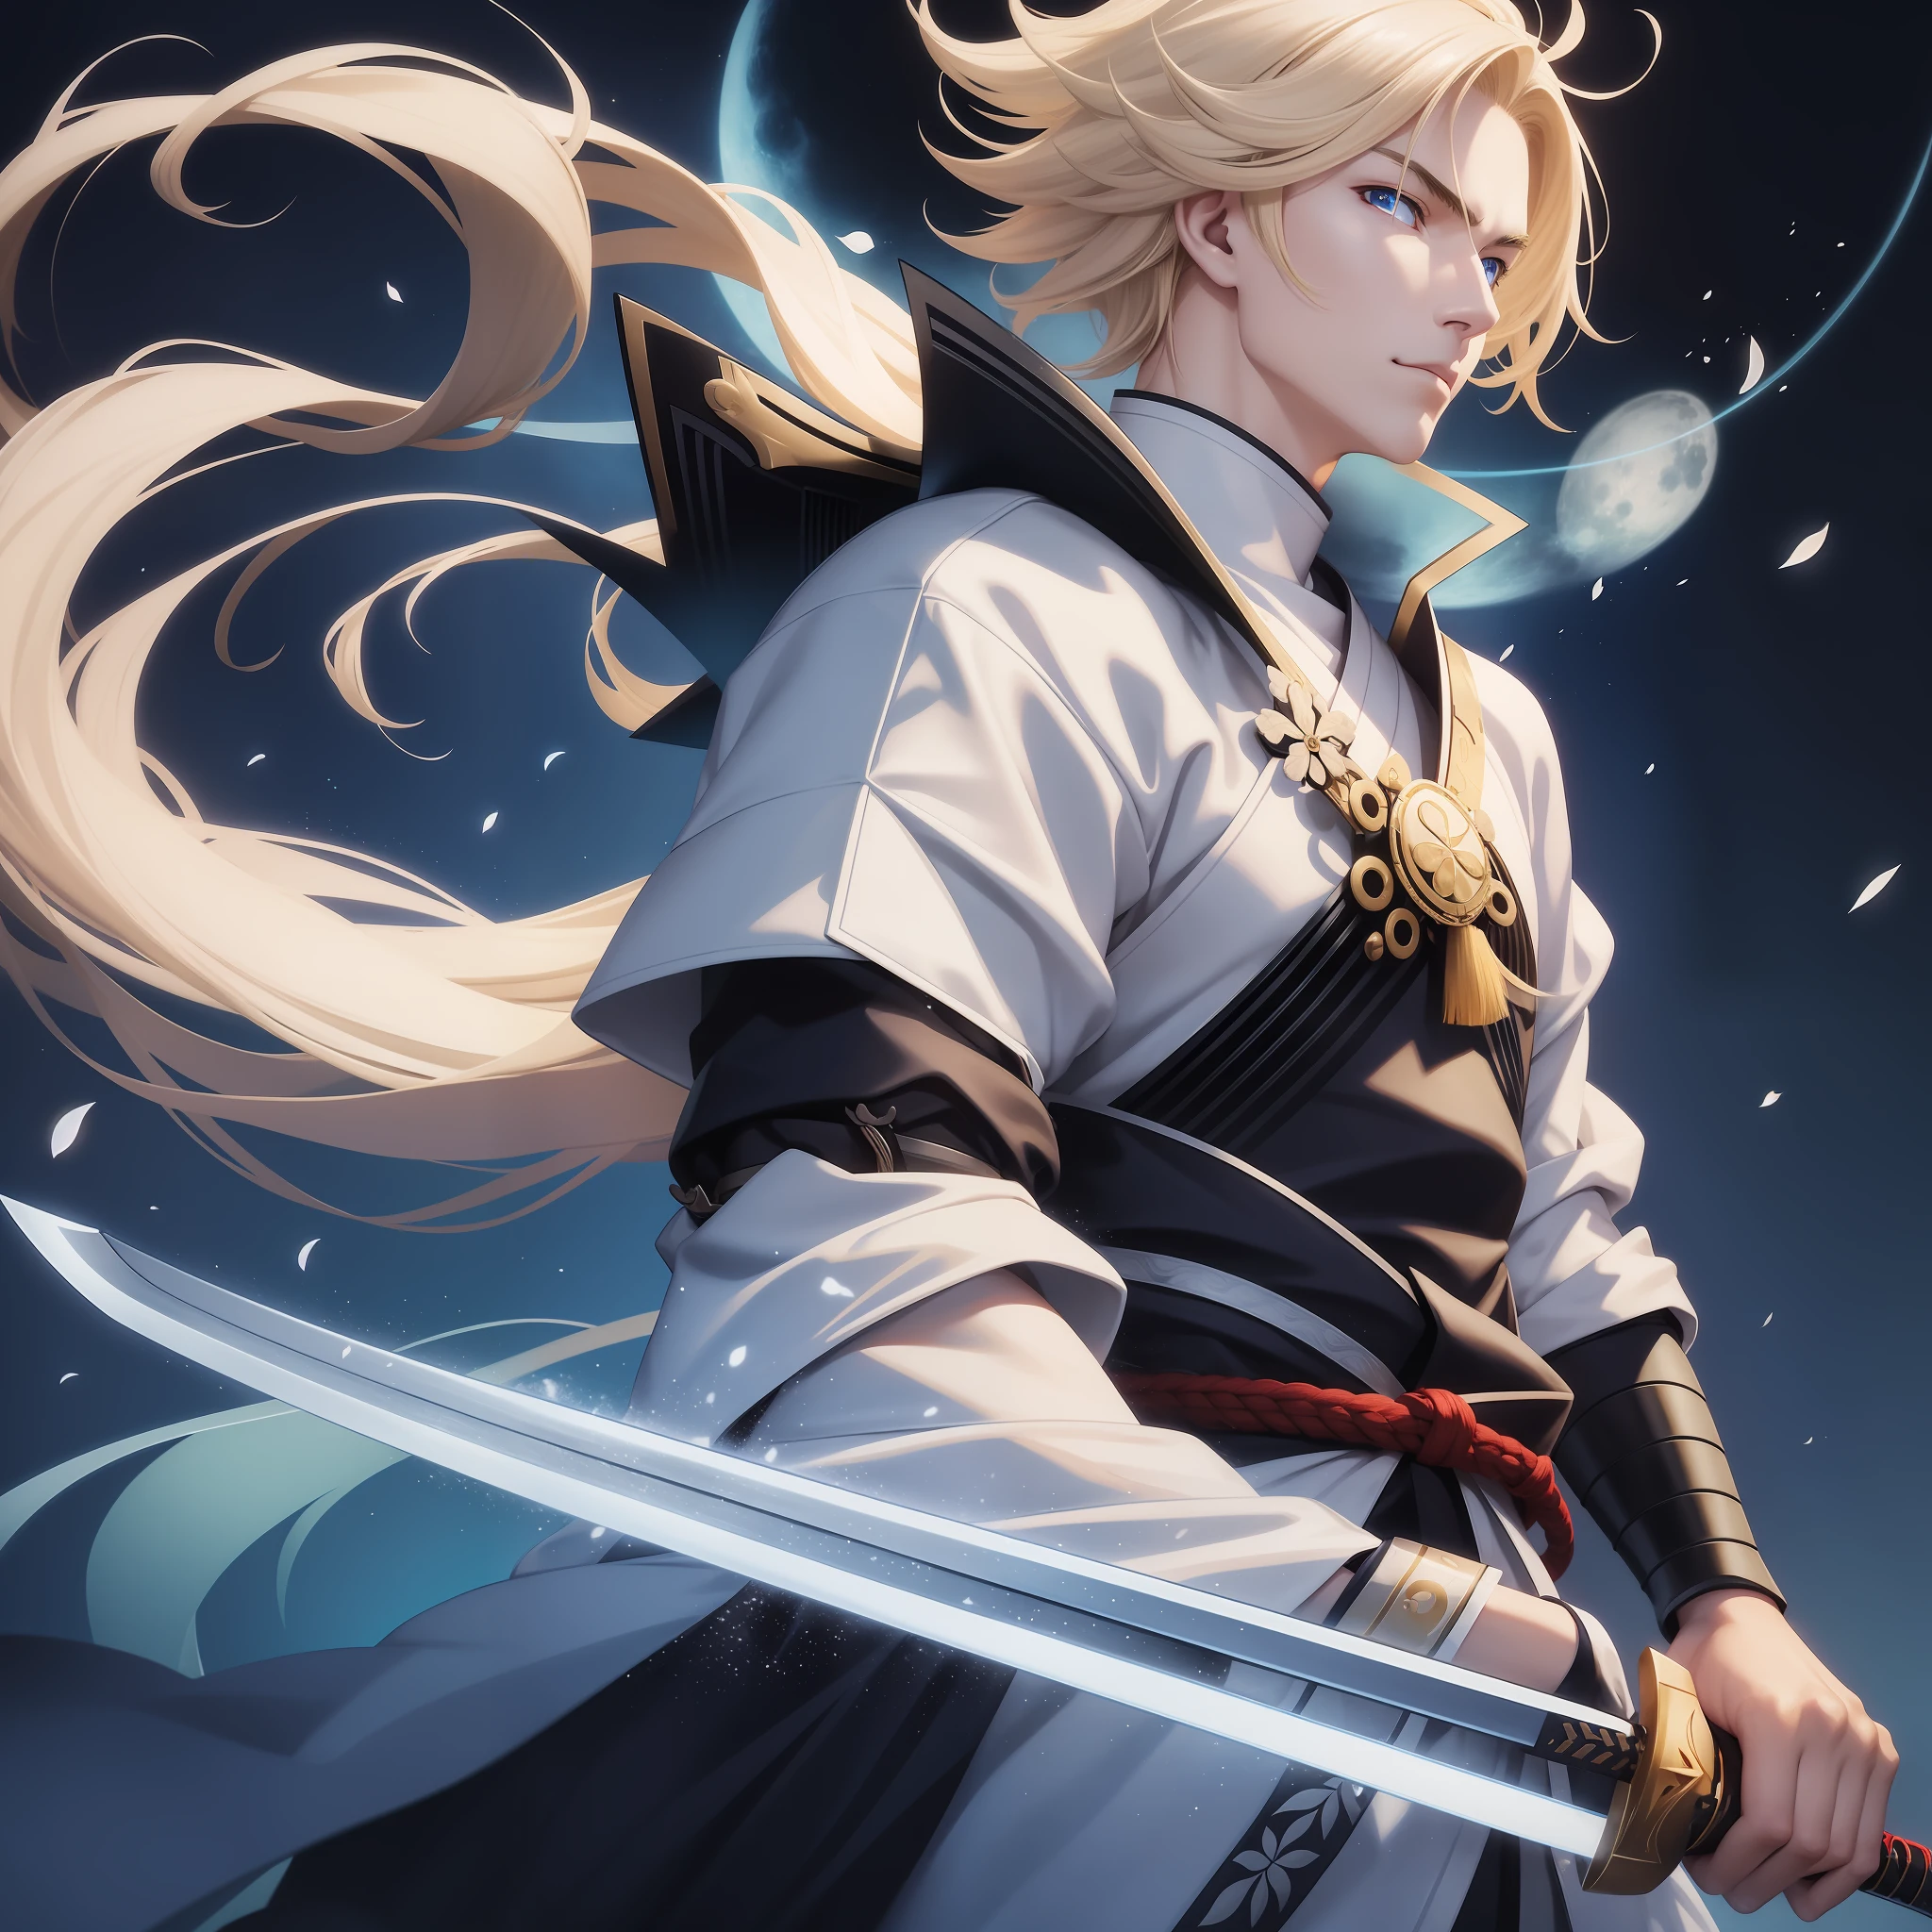 male samurai,white,with blonde hair,with a sword of rays,with blue eyes,at night,full moon,hd,best picture,wallpaper,anime photography,drawing,hd